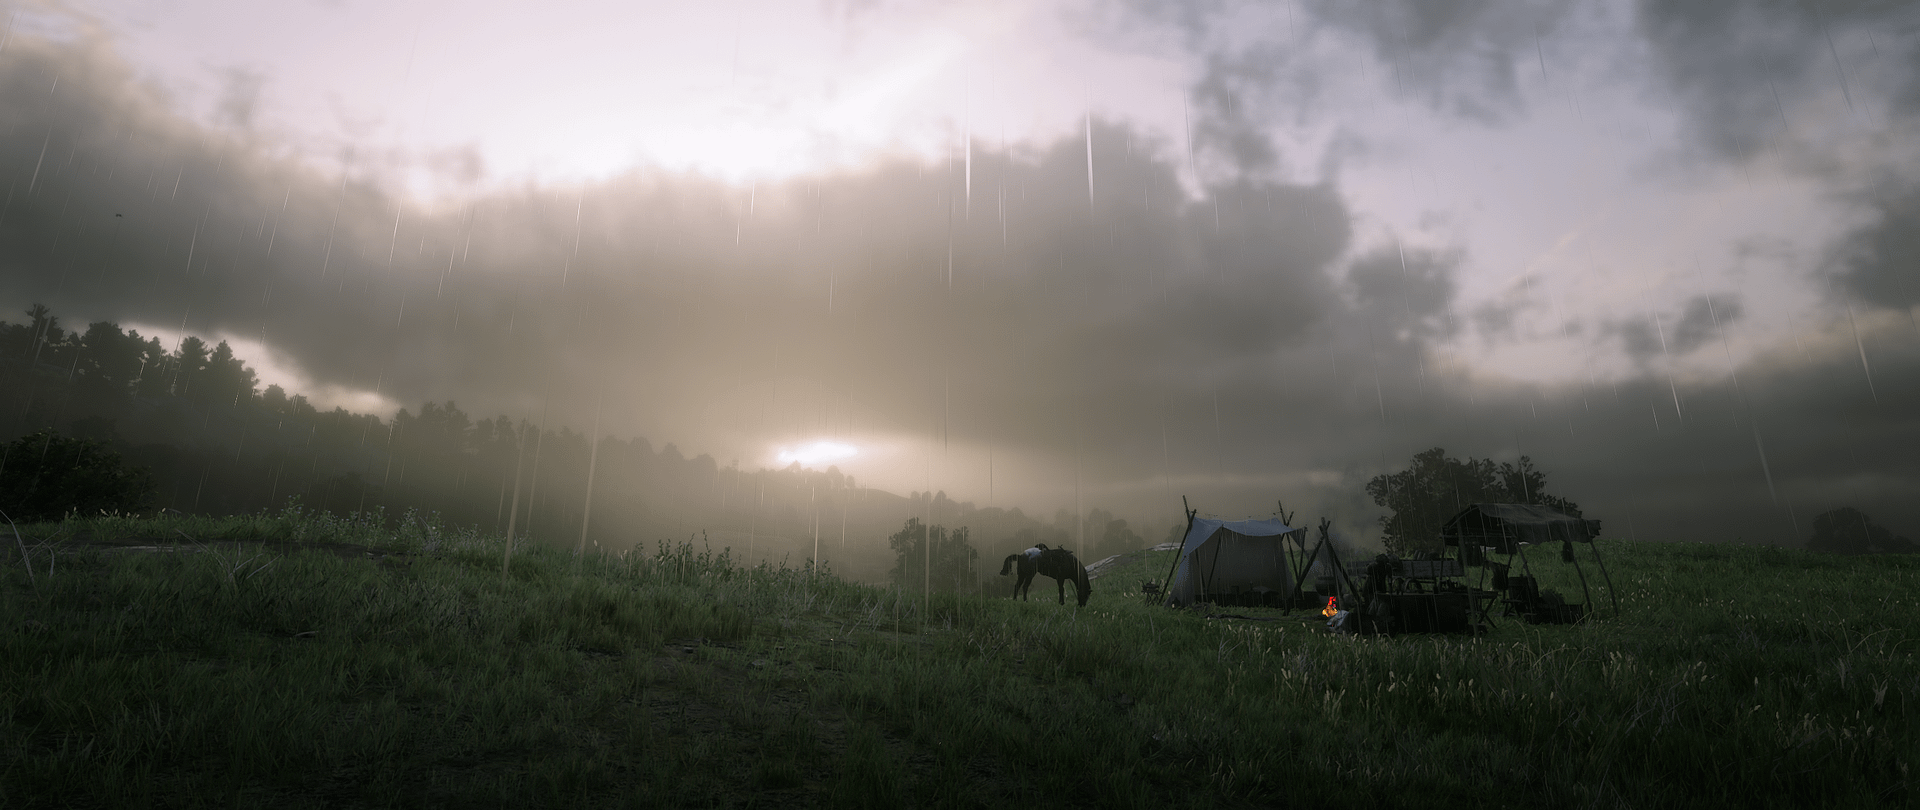 Red Dead Redemption 2 (for PC) Review